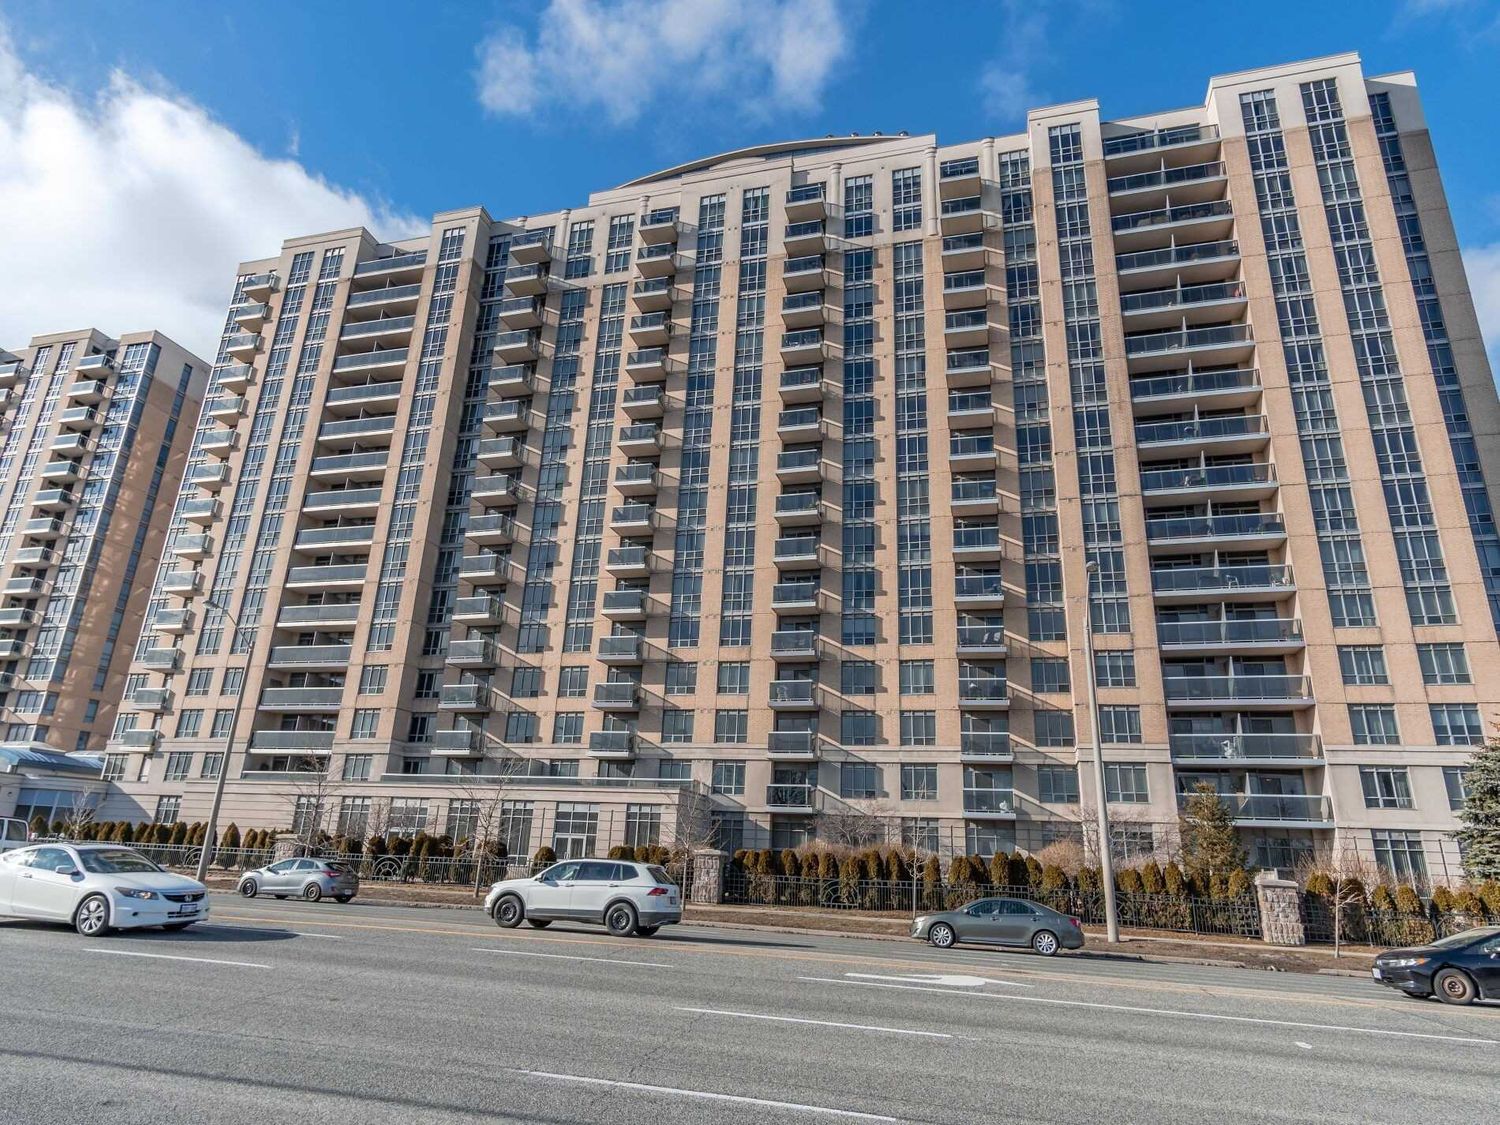 8 Mondeo Drive. Mondeo Springs Condos is located in  Scarborough, Toronto - image #1 of 3